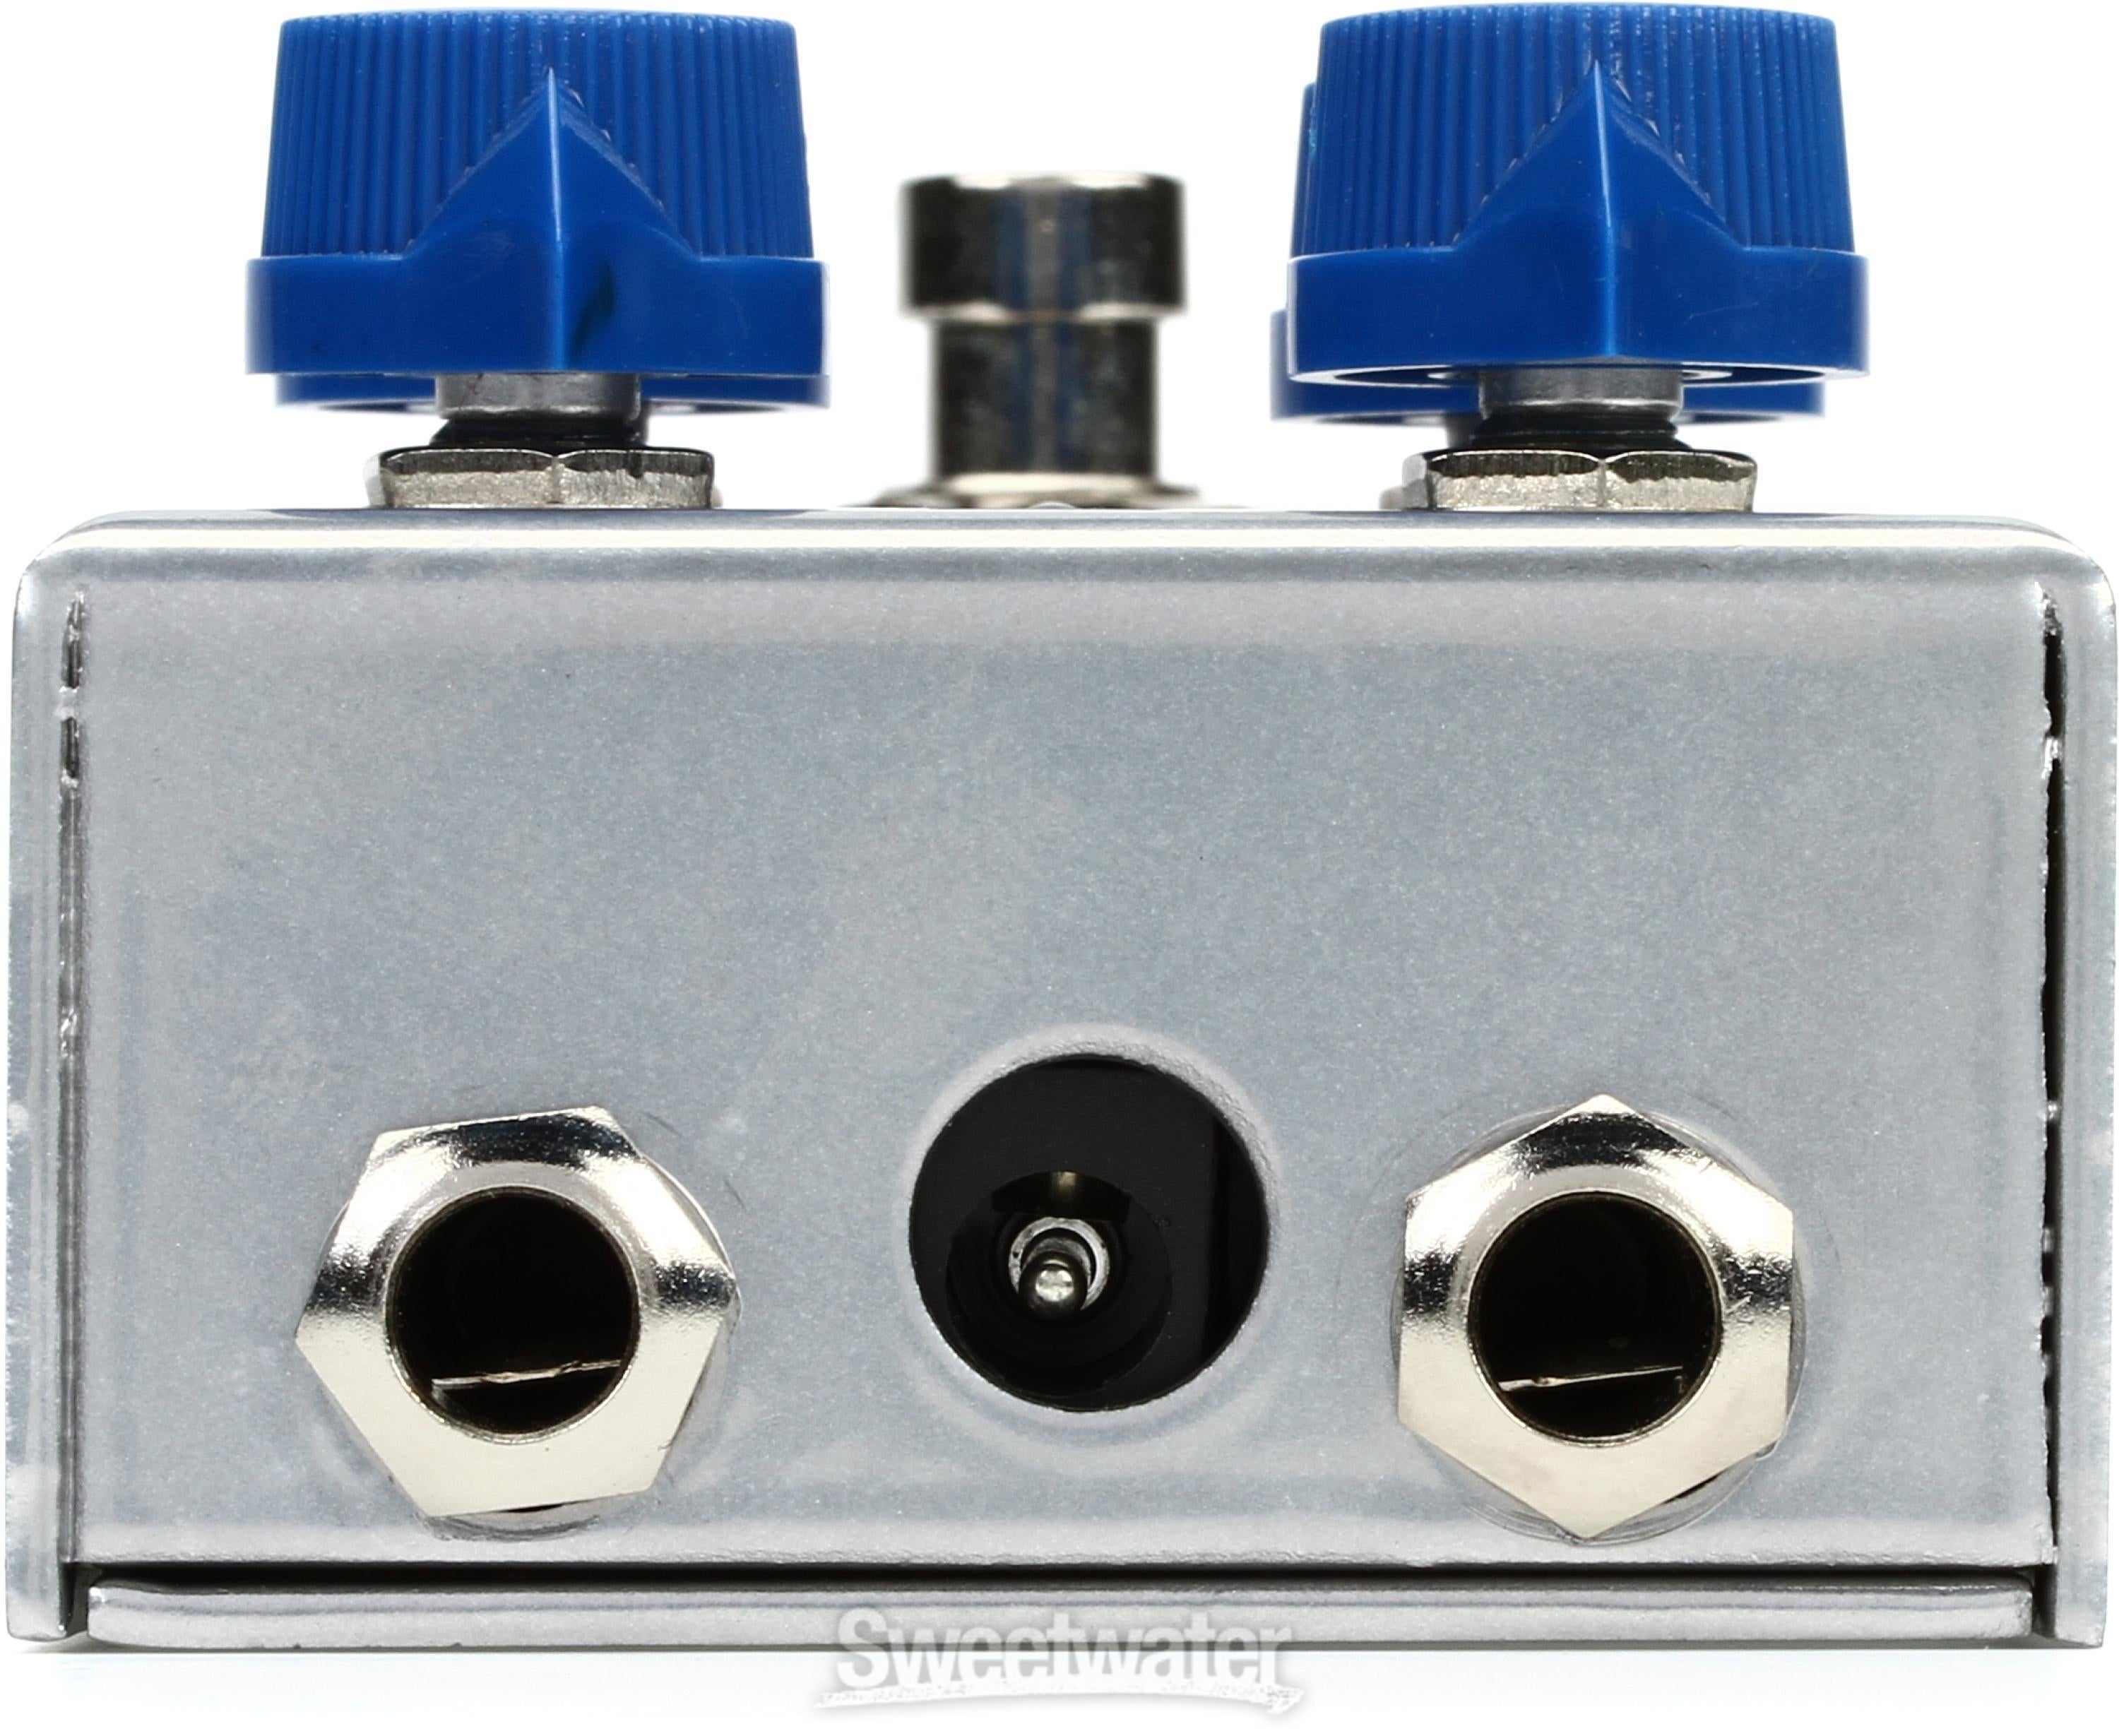 J. Rockett Audio Designs Blue Note Boost/Overdrive Pedal | Sweetwater